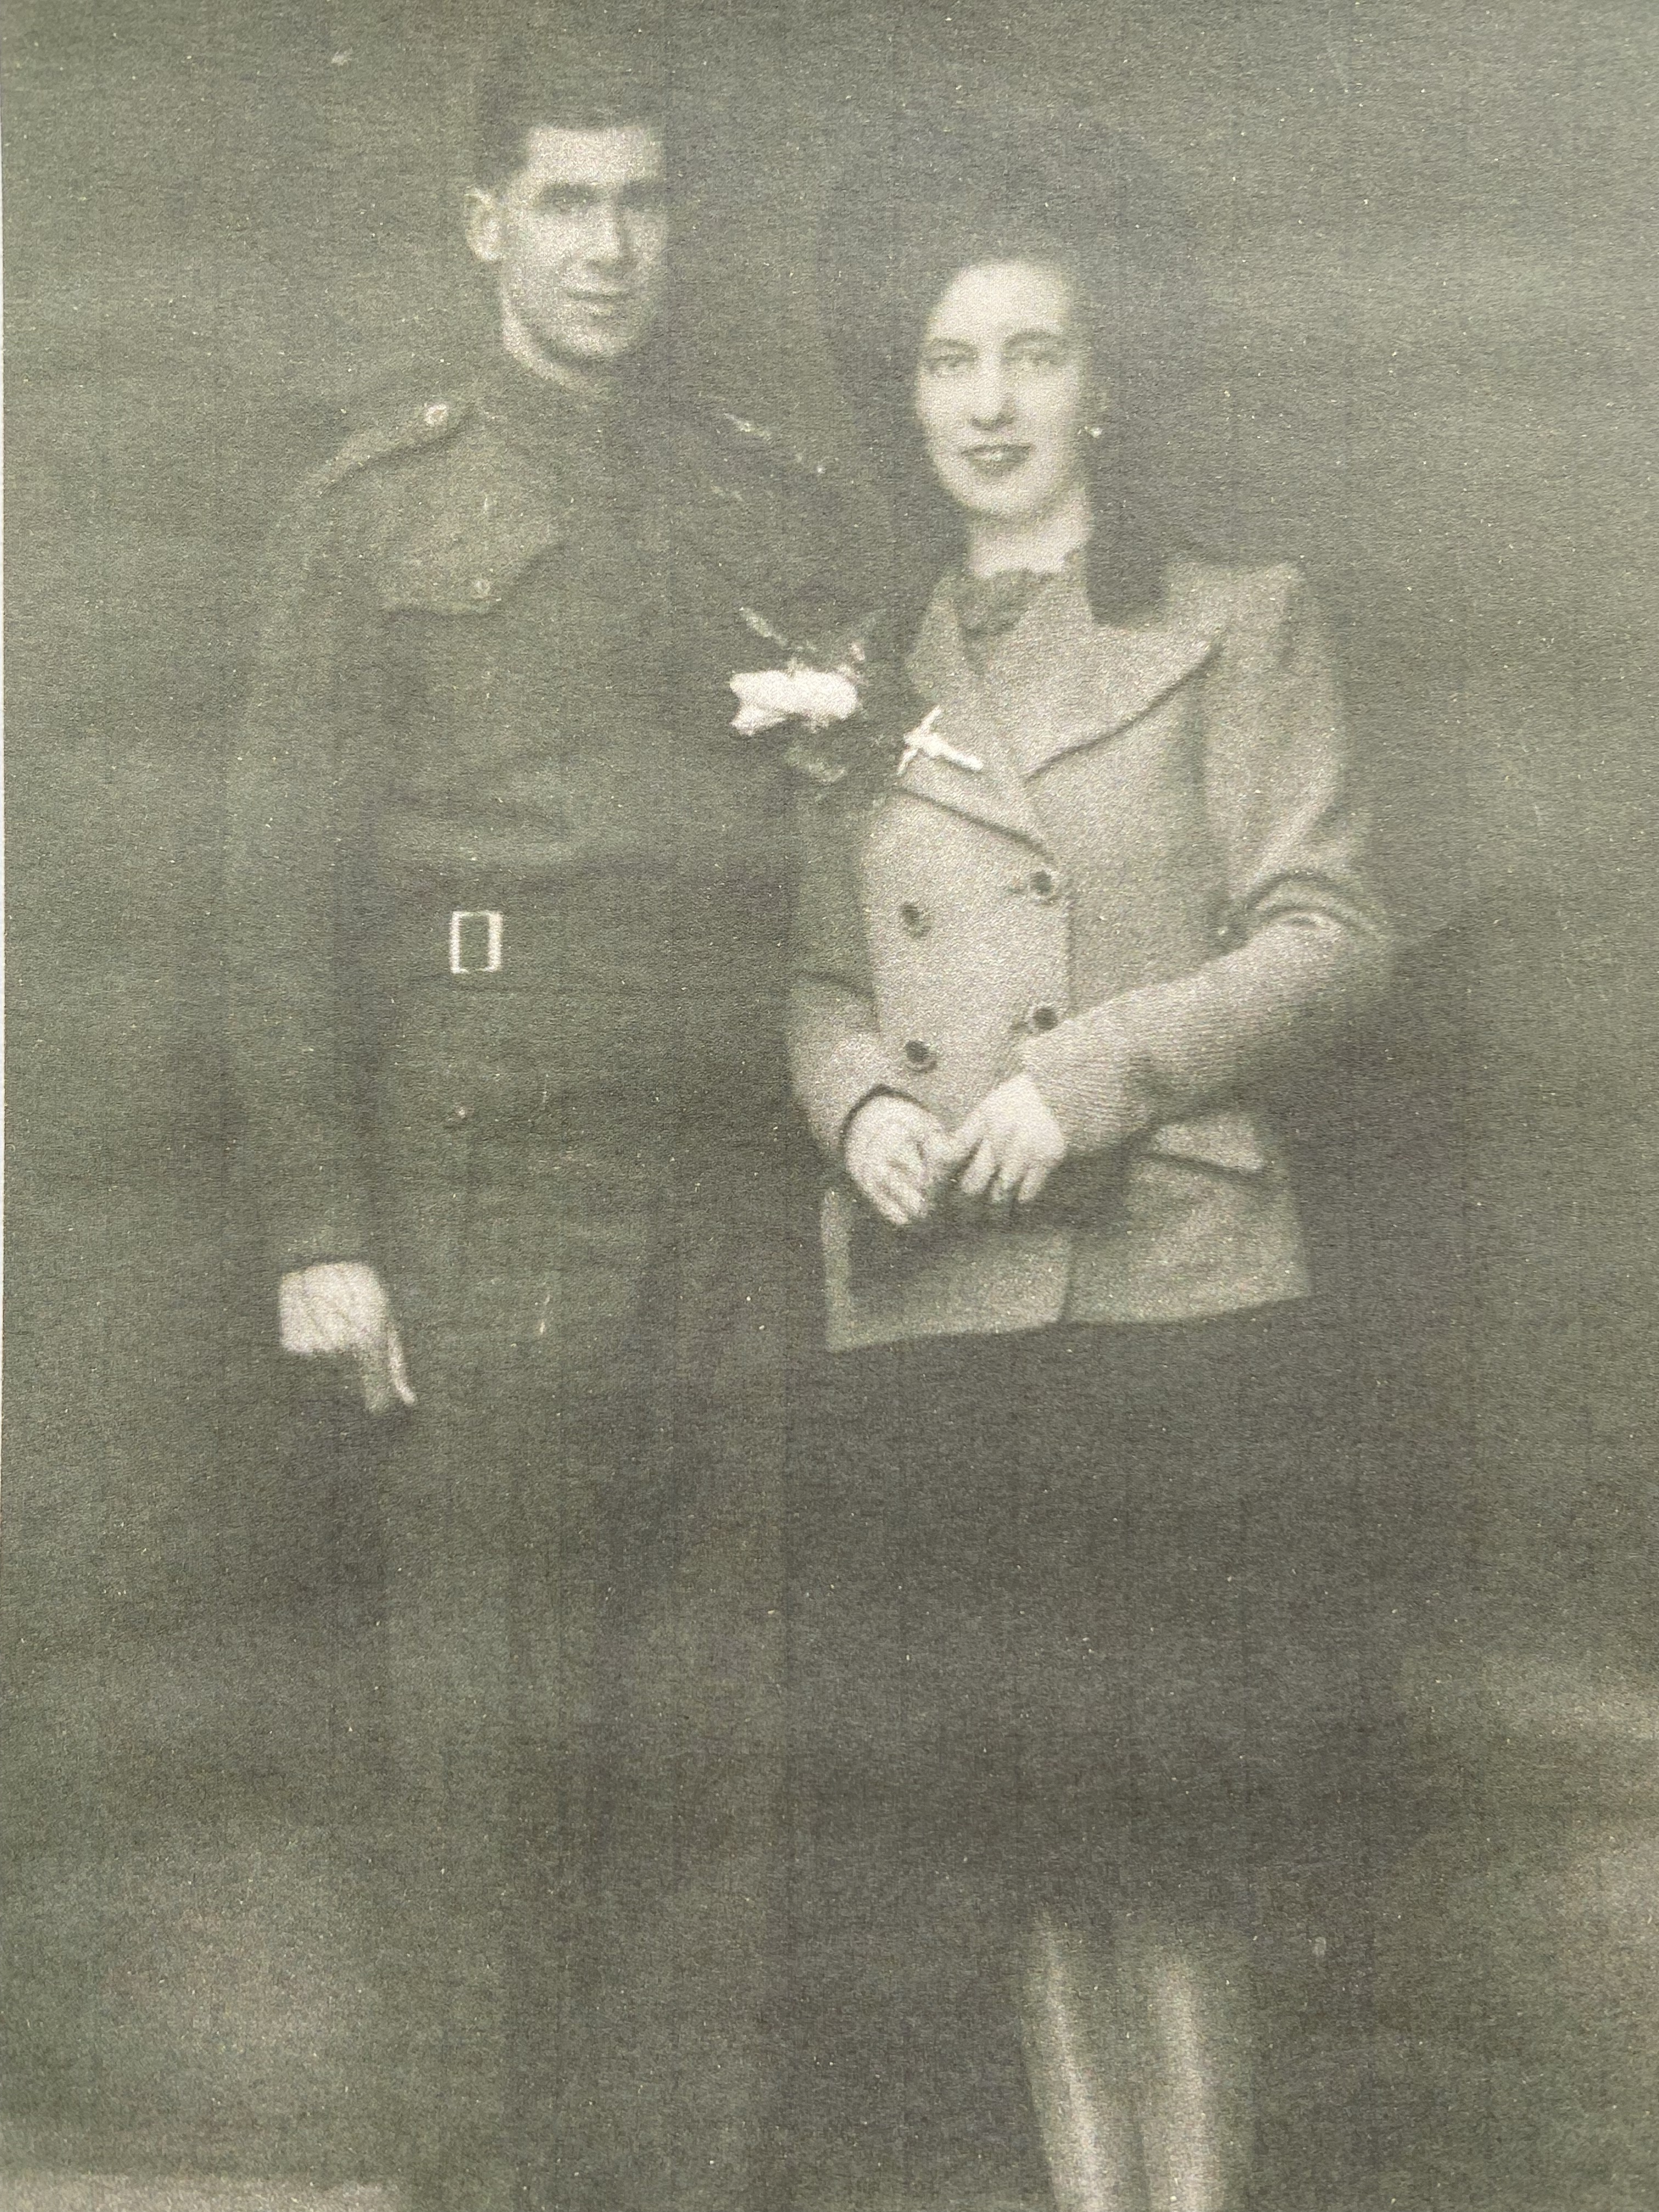 Black and white photograph of a man and woman